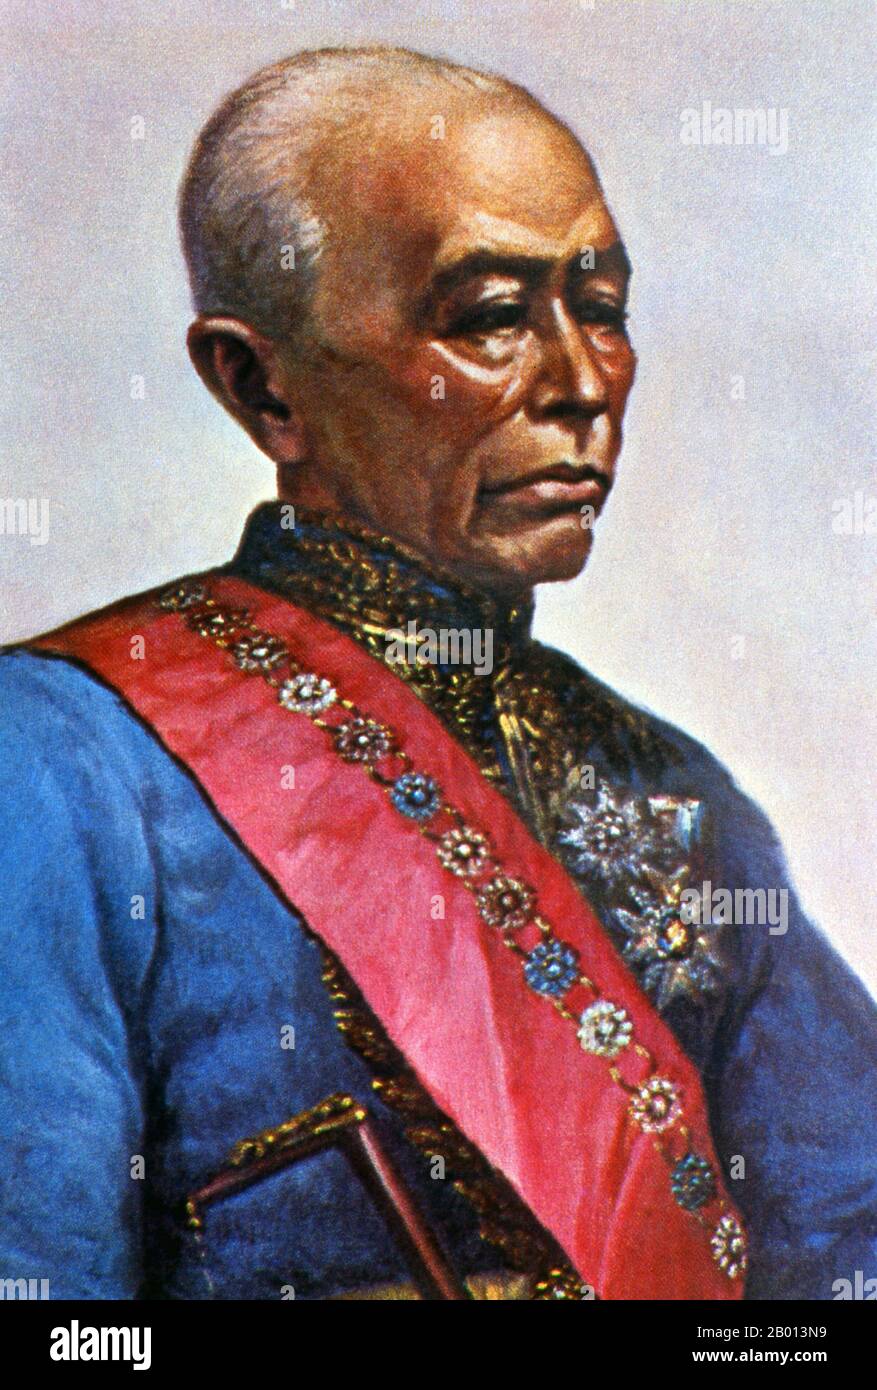 Phra Bat Somdet Phra Poramenthramaha Mongkut Phra Chom Klao Chao Yu Hua, or Rama  IV, known in foreign countries as King Mongkut (18 October 1804 – 1 October  1868), was the fourth